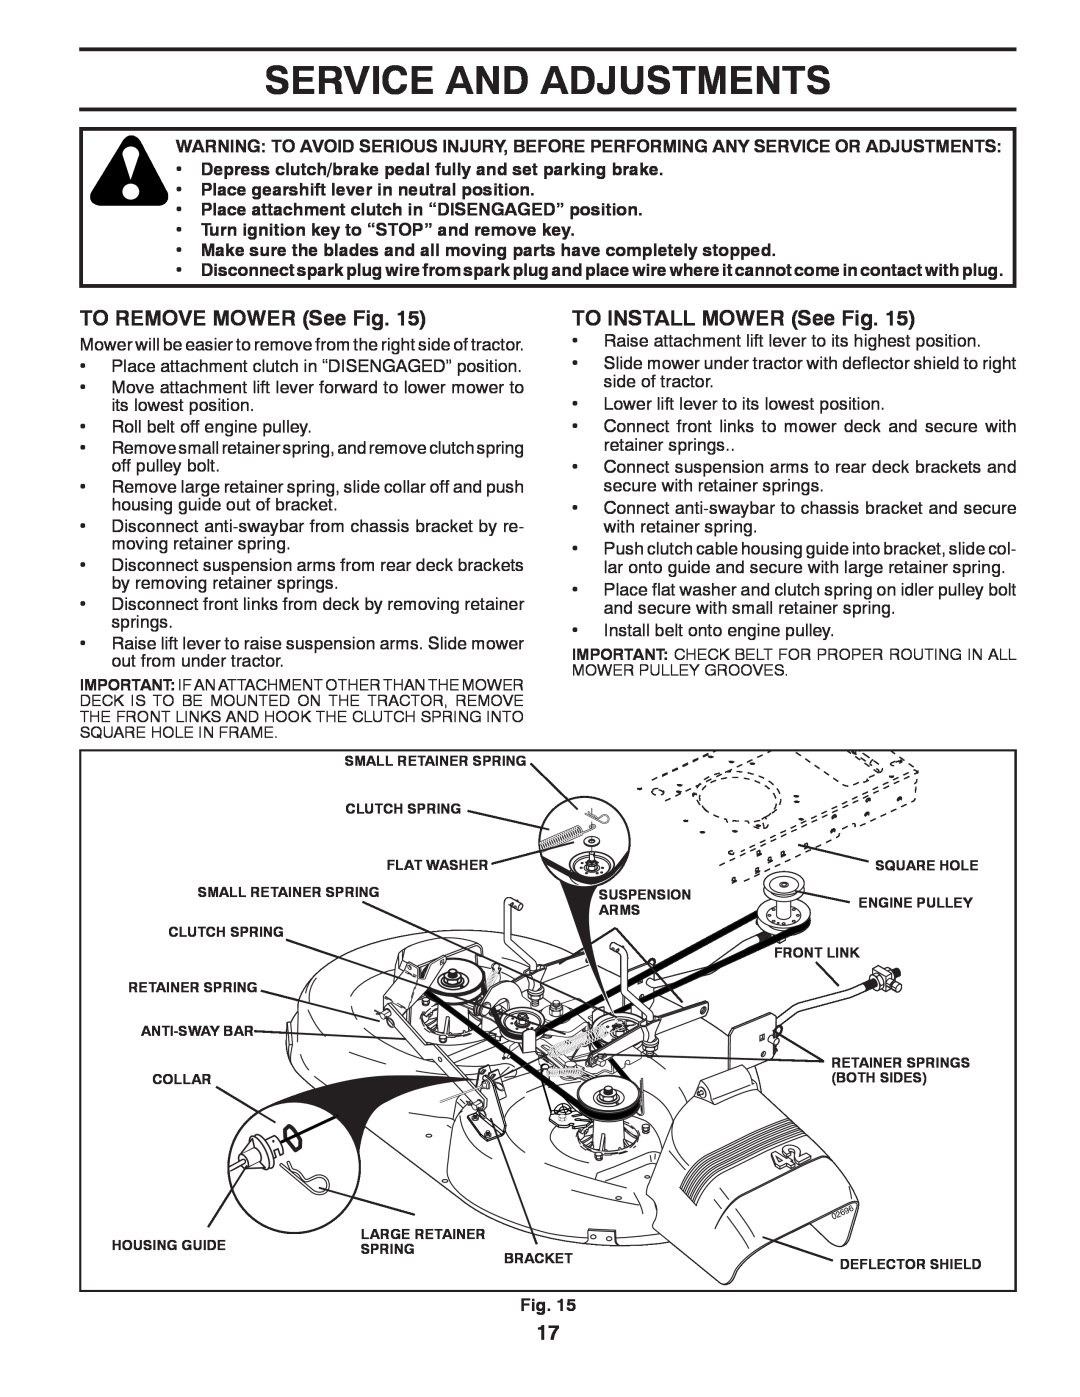 Poulan PXT175G42, 532 43 88-17, 96016002400 manual Service And Adjustments, TO REMOVE MOWER See Fig, TO INSTALL MOWER See Fig 